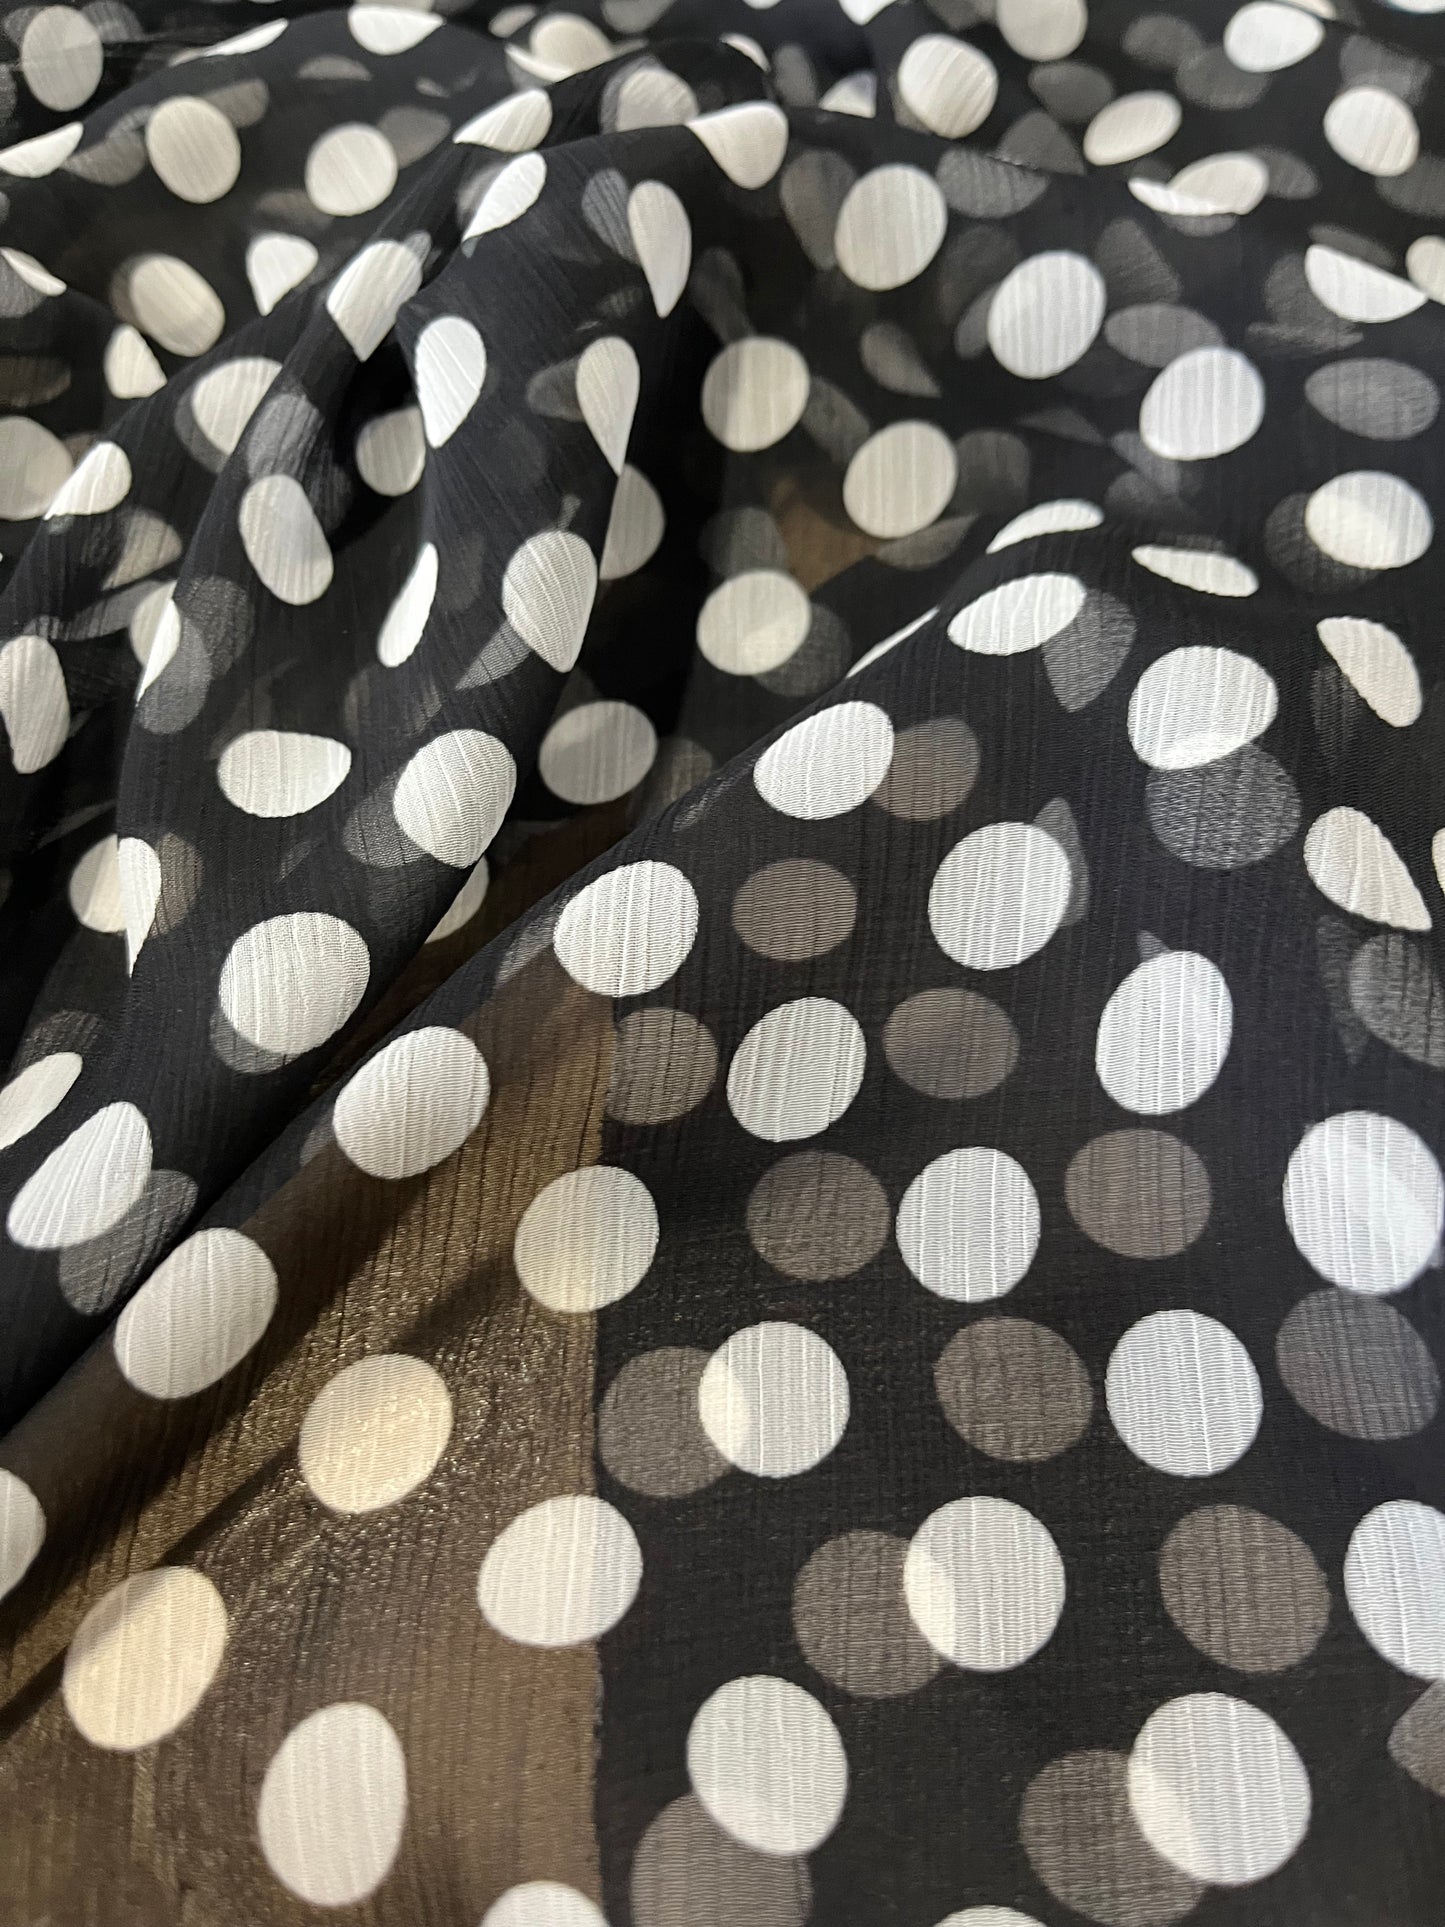 D01 MERANO 20 voile crepon wih dots